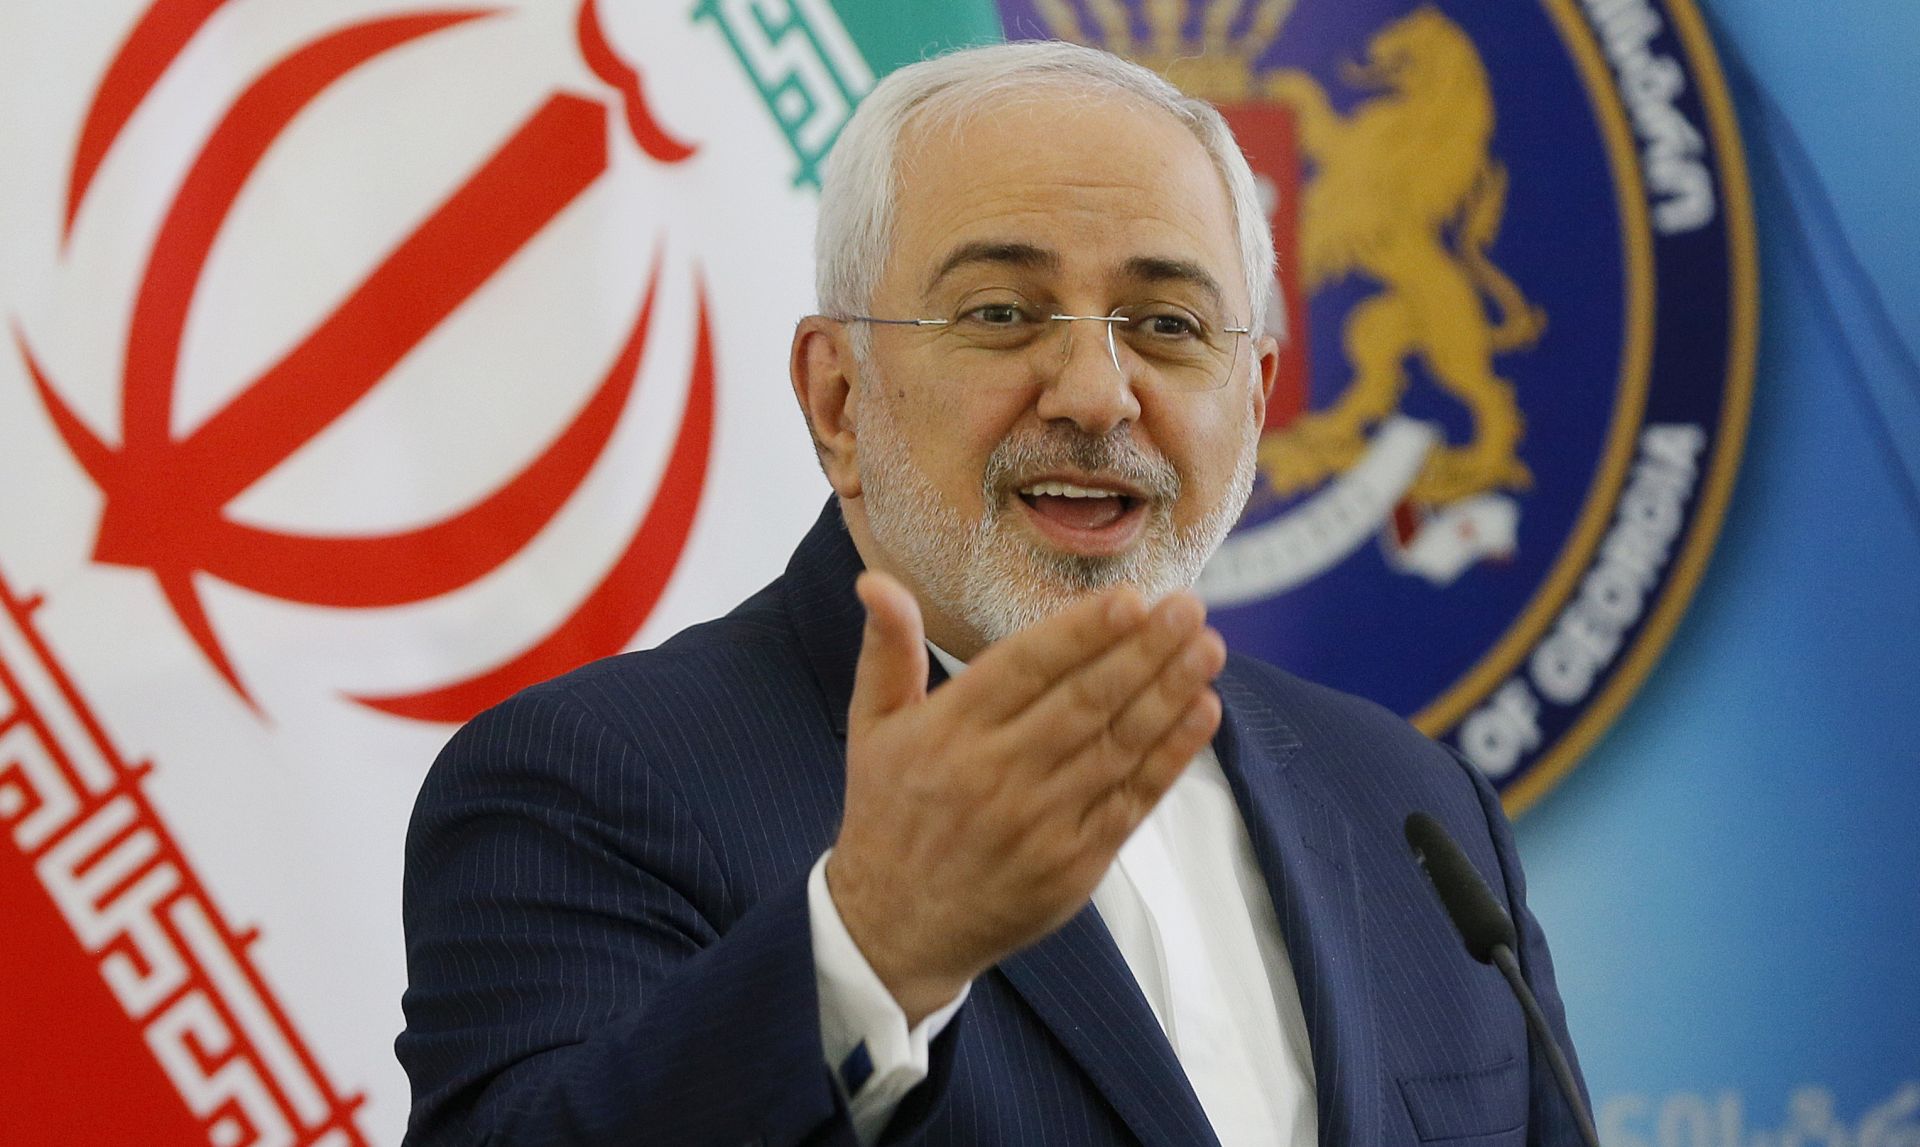 epa07397600 (FILE) - Iranian Foreign Minister Mohammad Javad Zarif attends a joint press conference  in Tbilisi, Georgia, 18 April 2017 (Reissued on 25 February 2019). Media reported that Zarif has announced his resignation late Monday night without prior warning.  EPA/ZURAB KURTSIKIDZE *** Local Caption *** 53462596